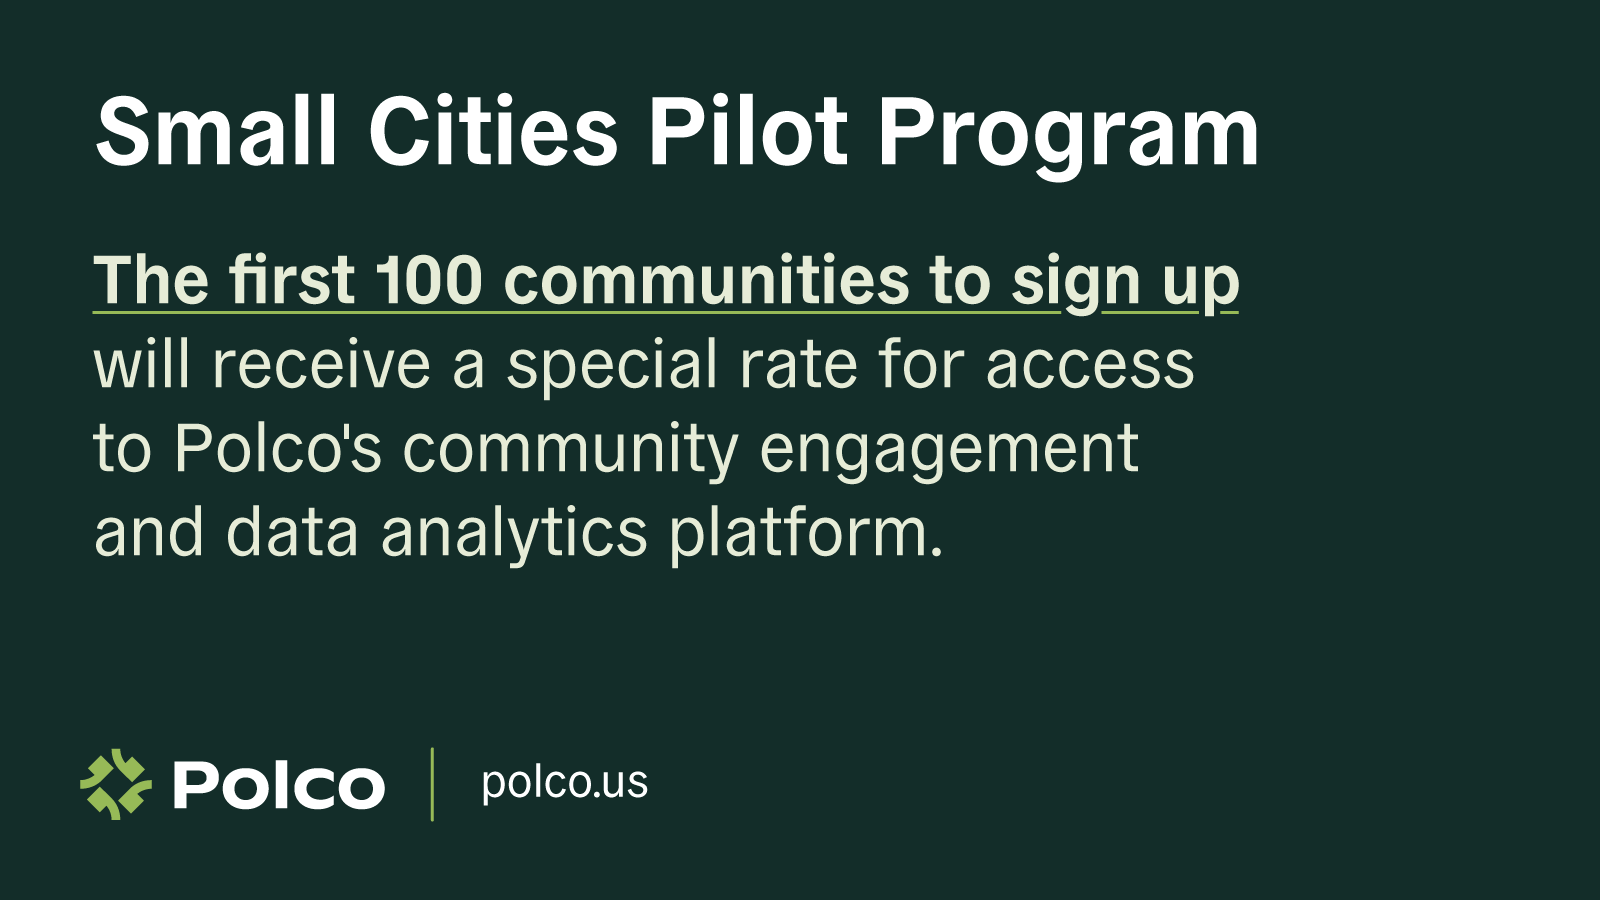 Special offer for the first 100 to sign up for the Small Cities Pilot Program